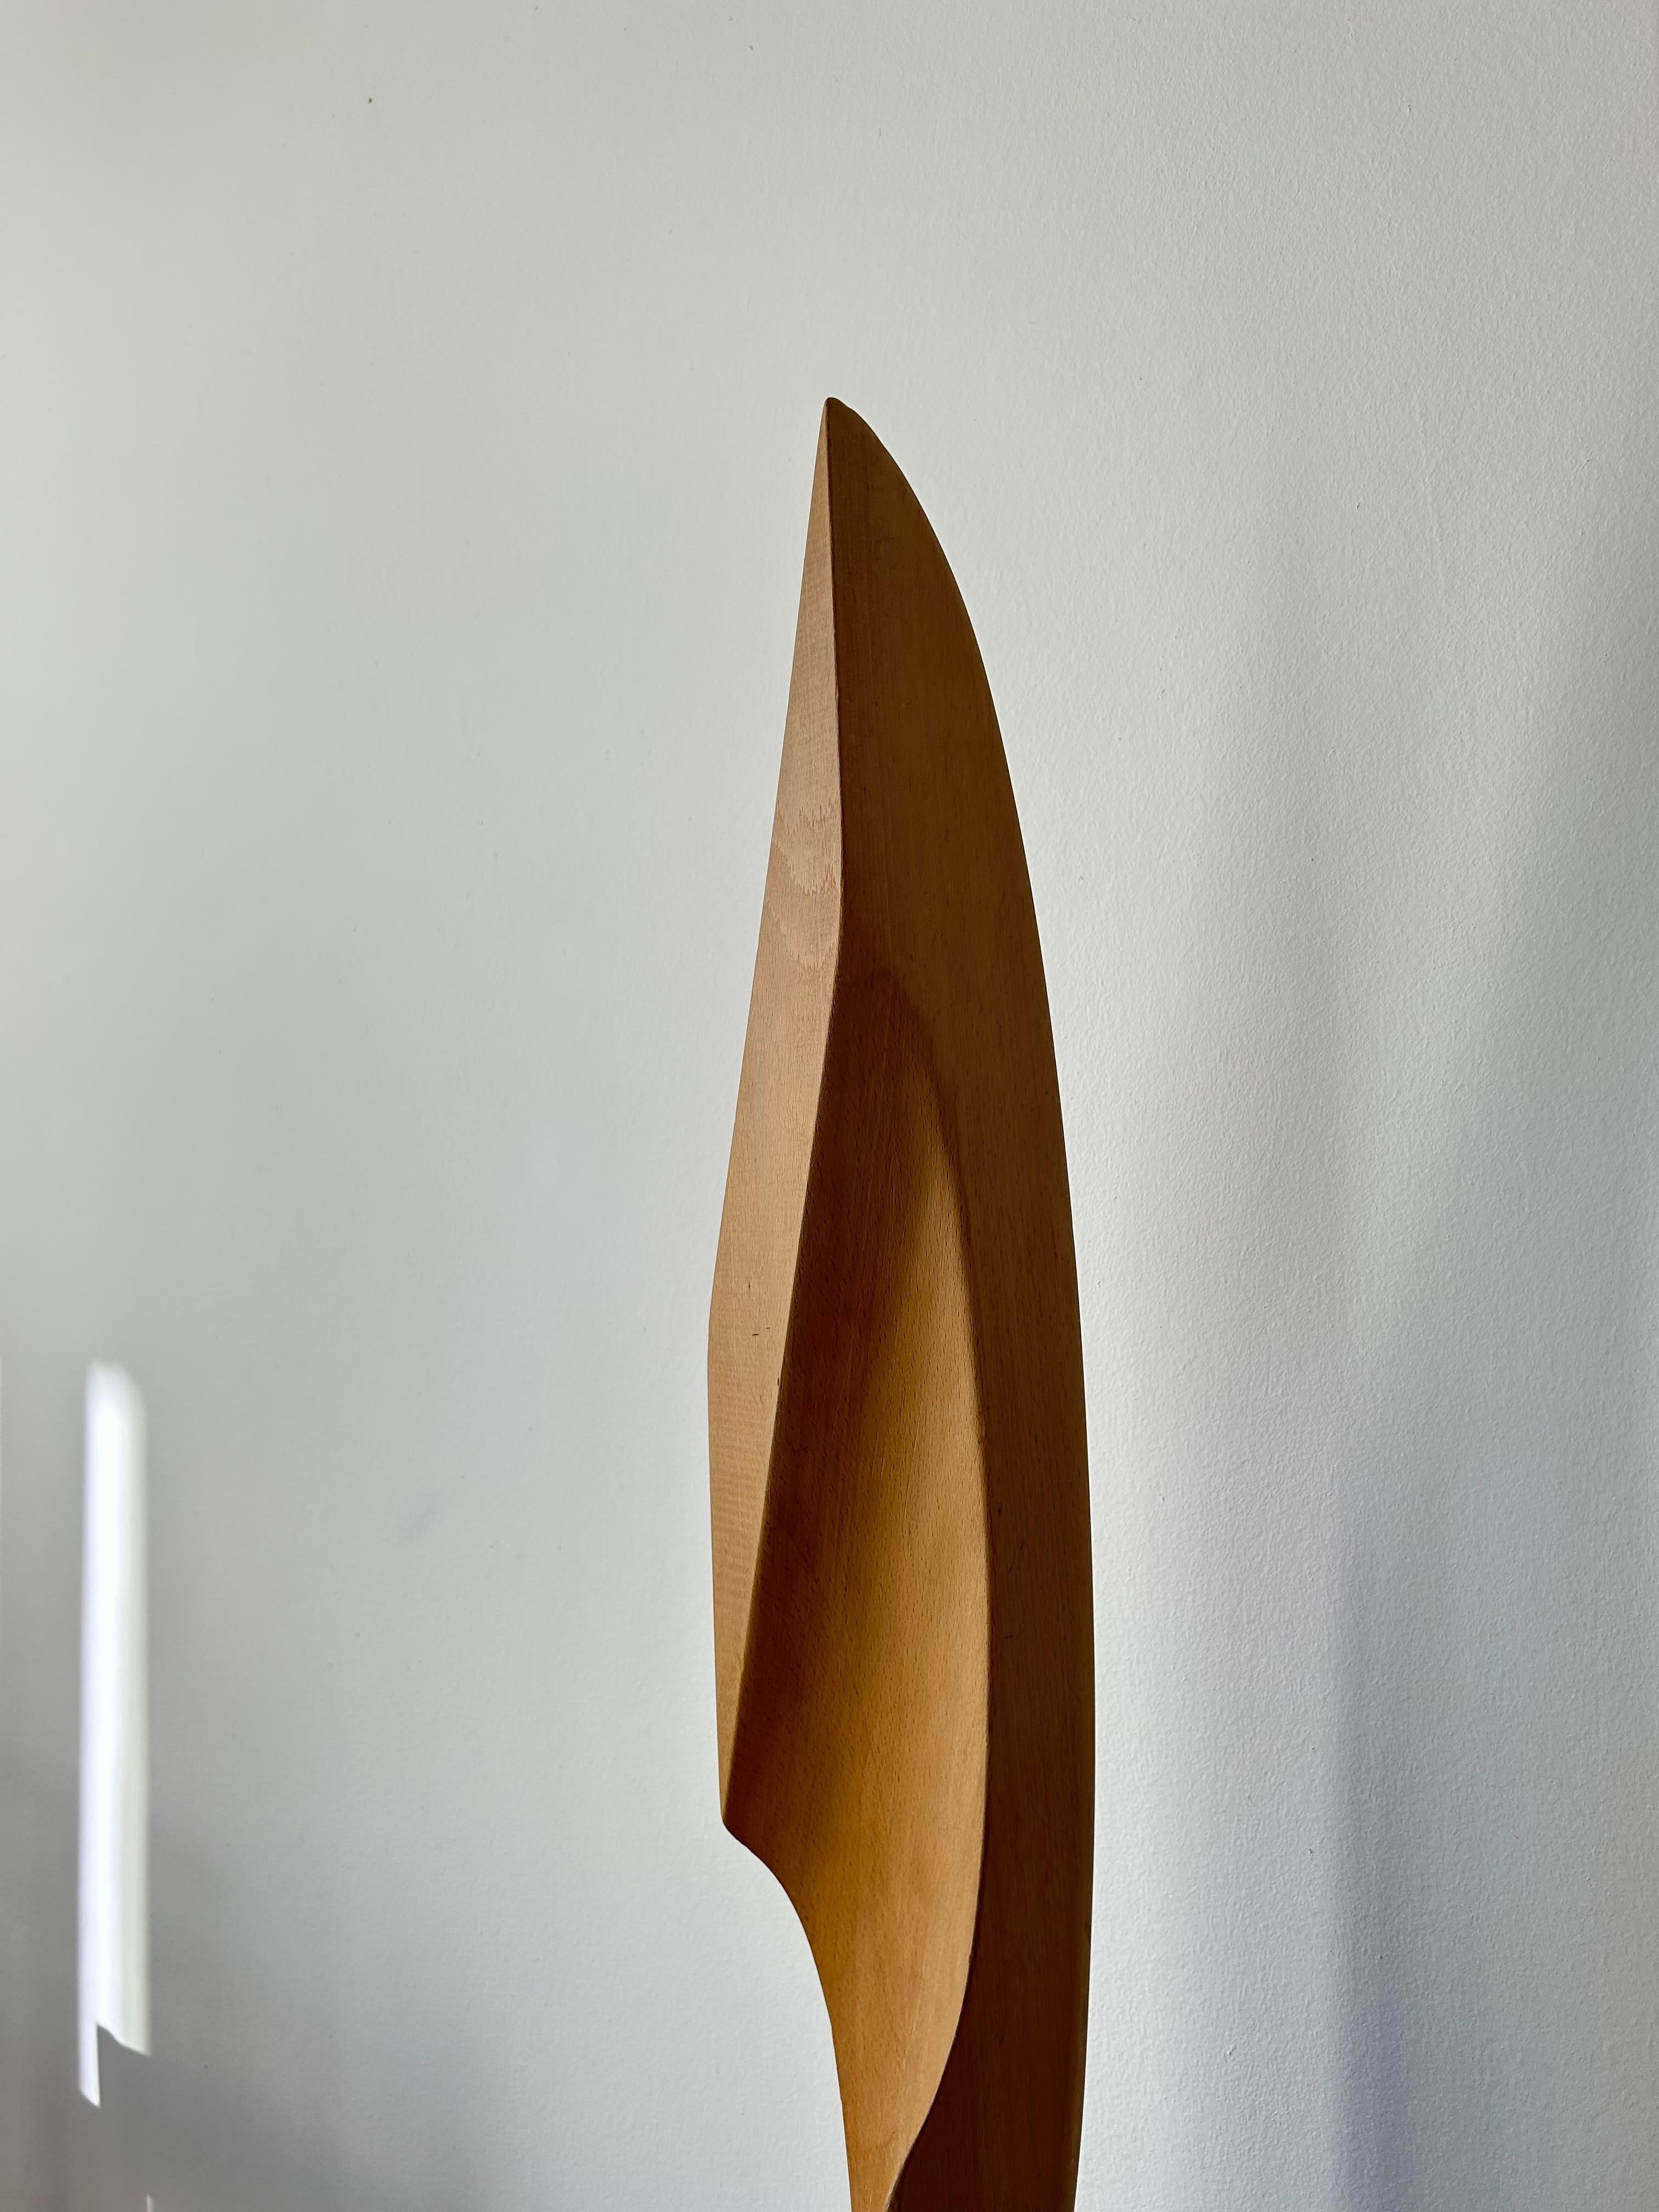 Rare Scandinavian abstract wooden sculpture in solid teak and beechwood made by an unknown Scandinavian artist in the 1960s.

The sculpture is the perfect decorative piece in any interior and will fit perfectly in the hallway or in the living room